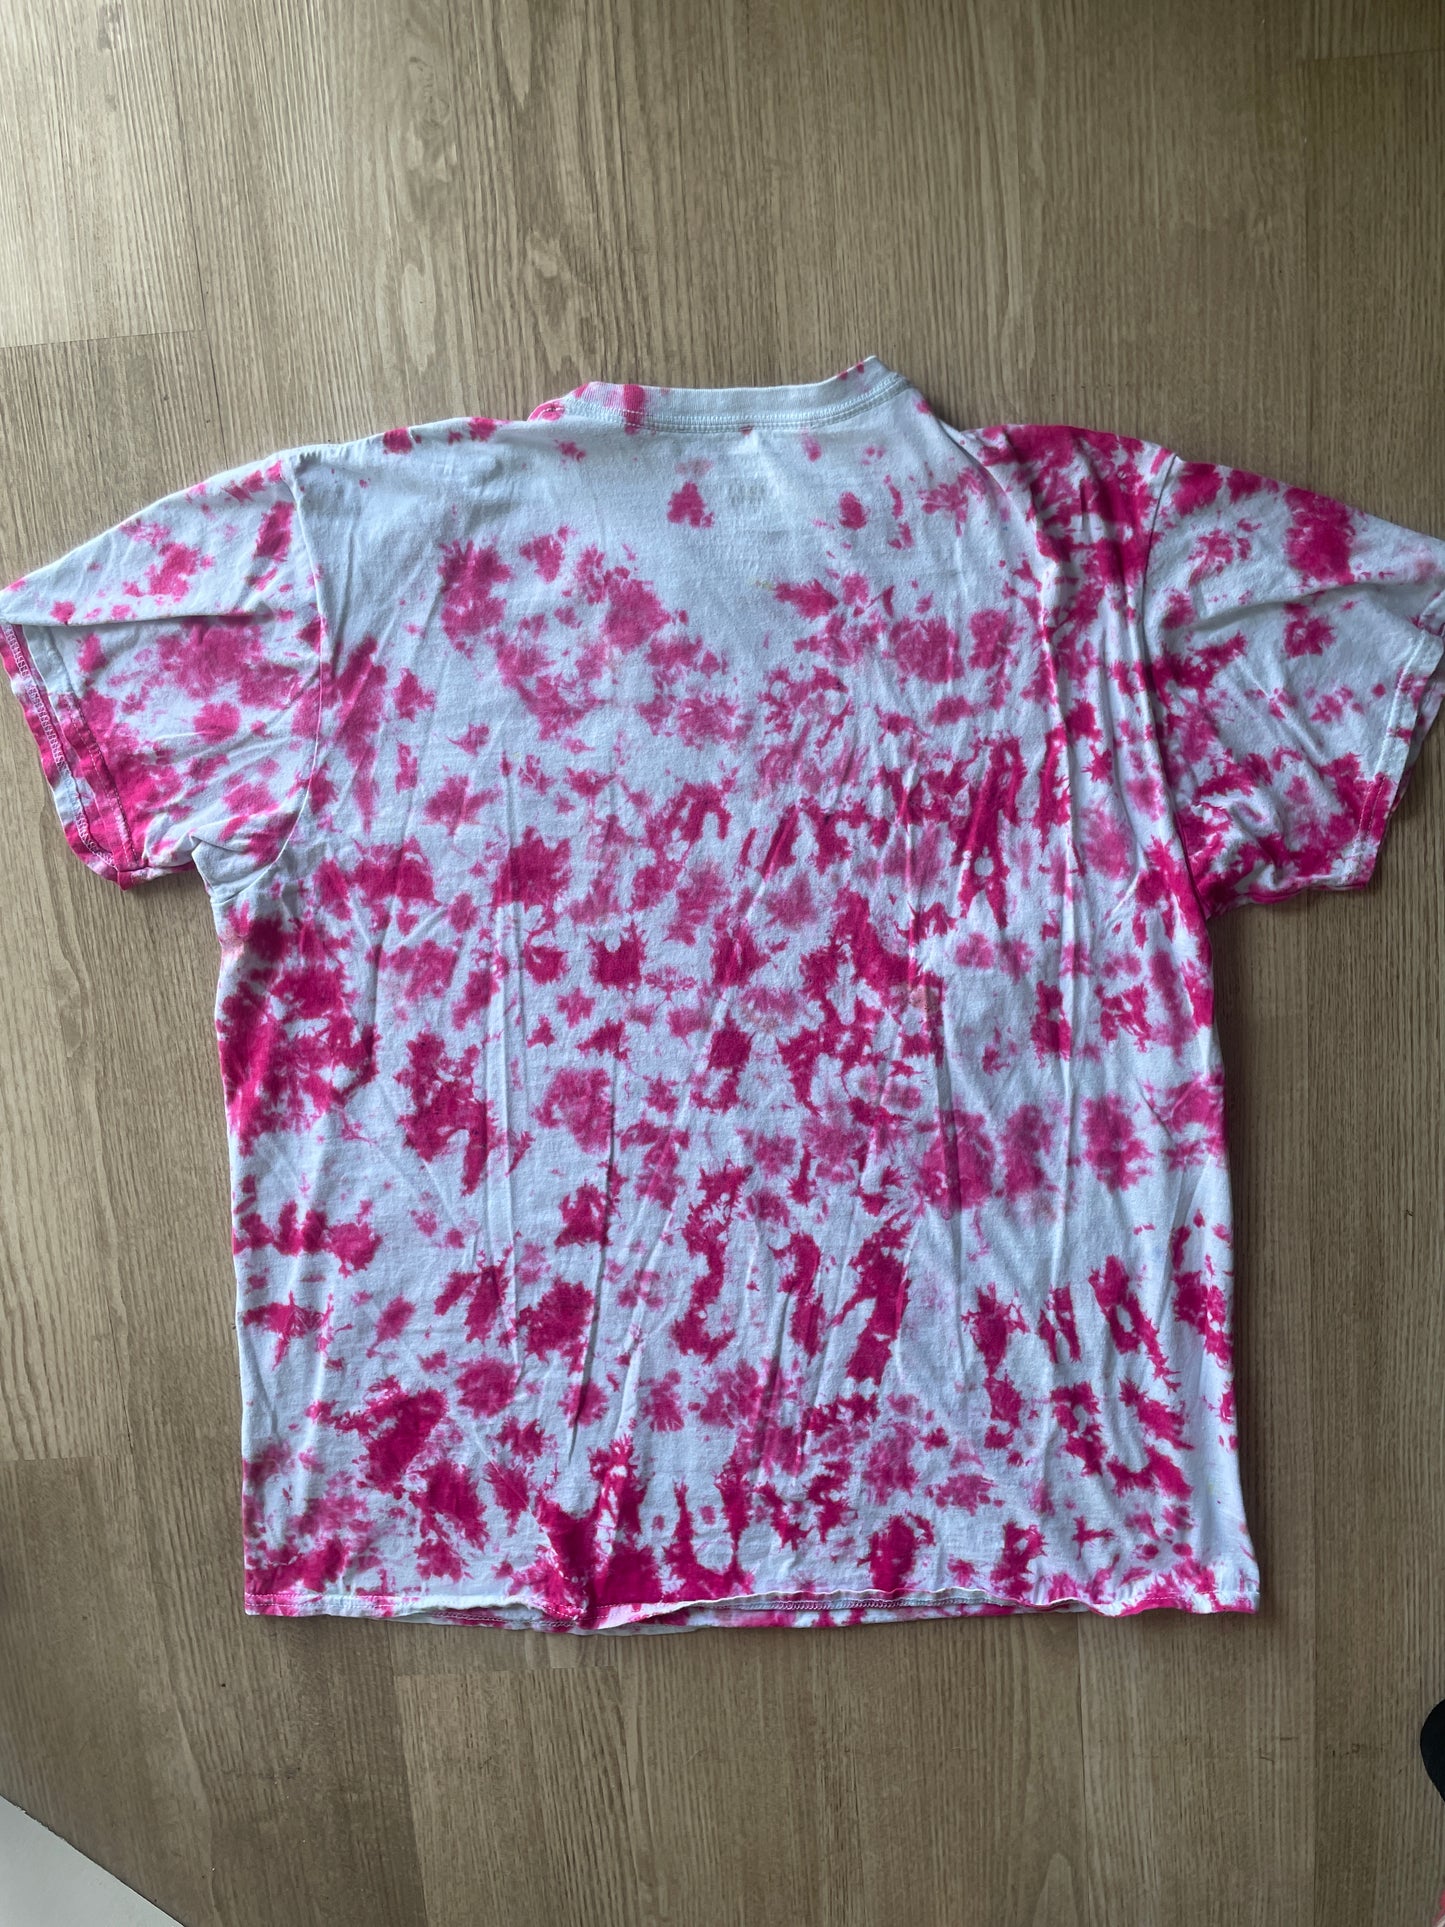 2XL Men's Prickly Pear Cactus Tie Dye T-Shirt | One-Of-a-Kind Pink and White Crumpled Short Sleeve